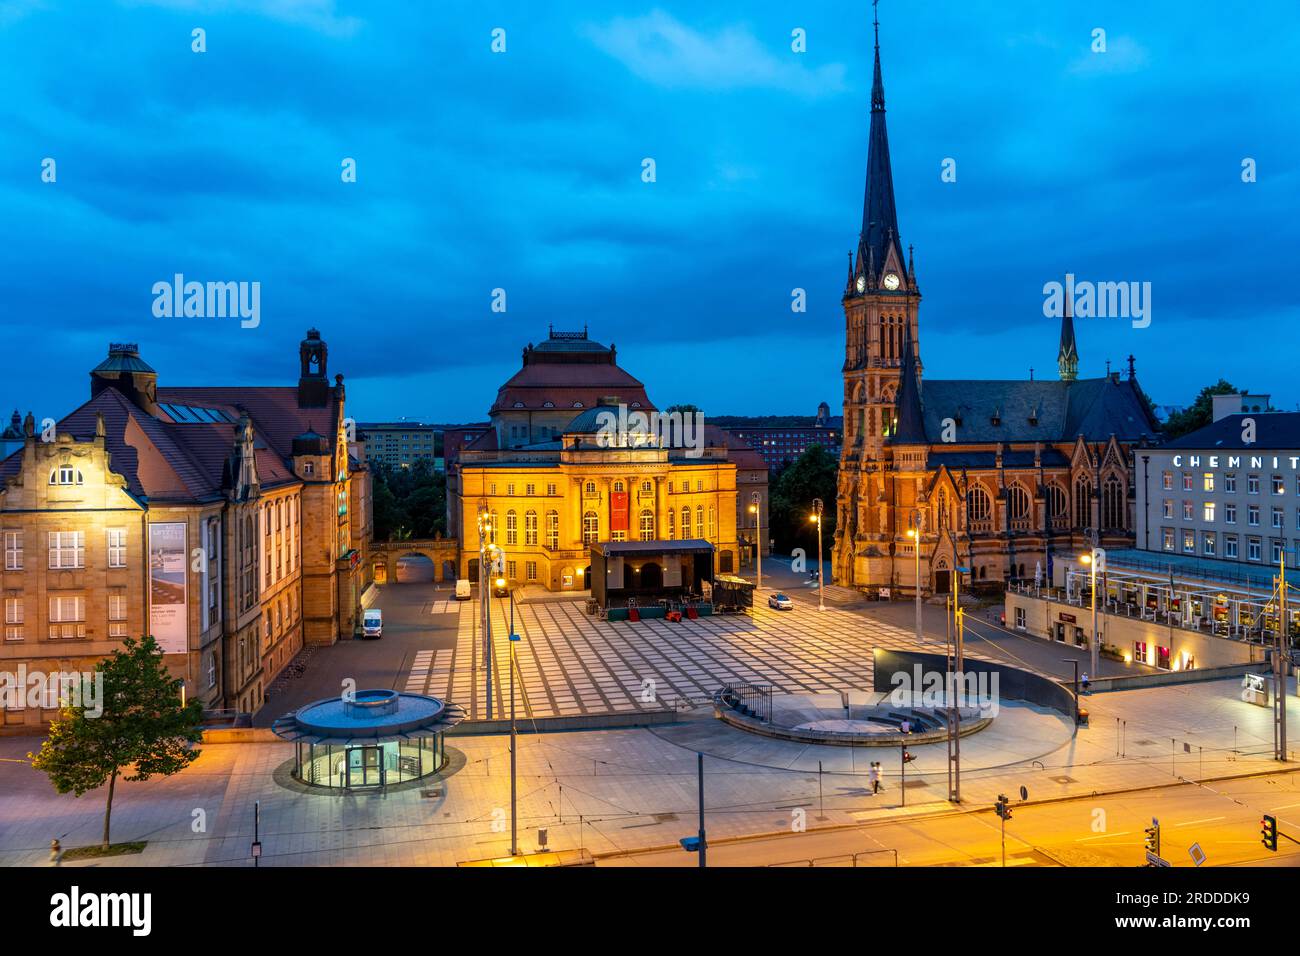 Theatre Square with the Opera House Chemnitz, on the right the Art Collections Chemnitz Saxony in the King Albert Museum, St. Petri Church, on the rig Stock Photo